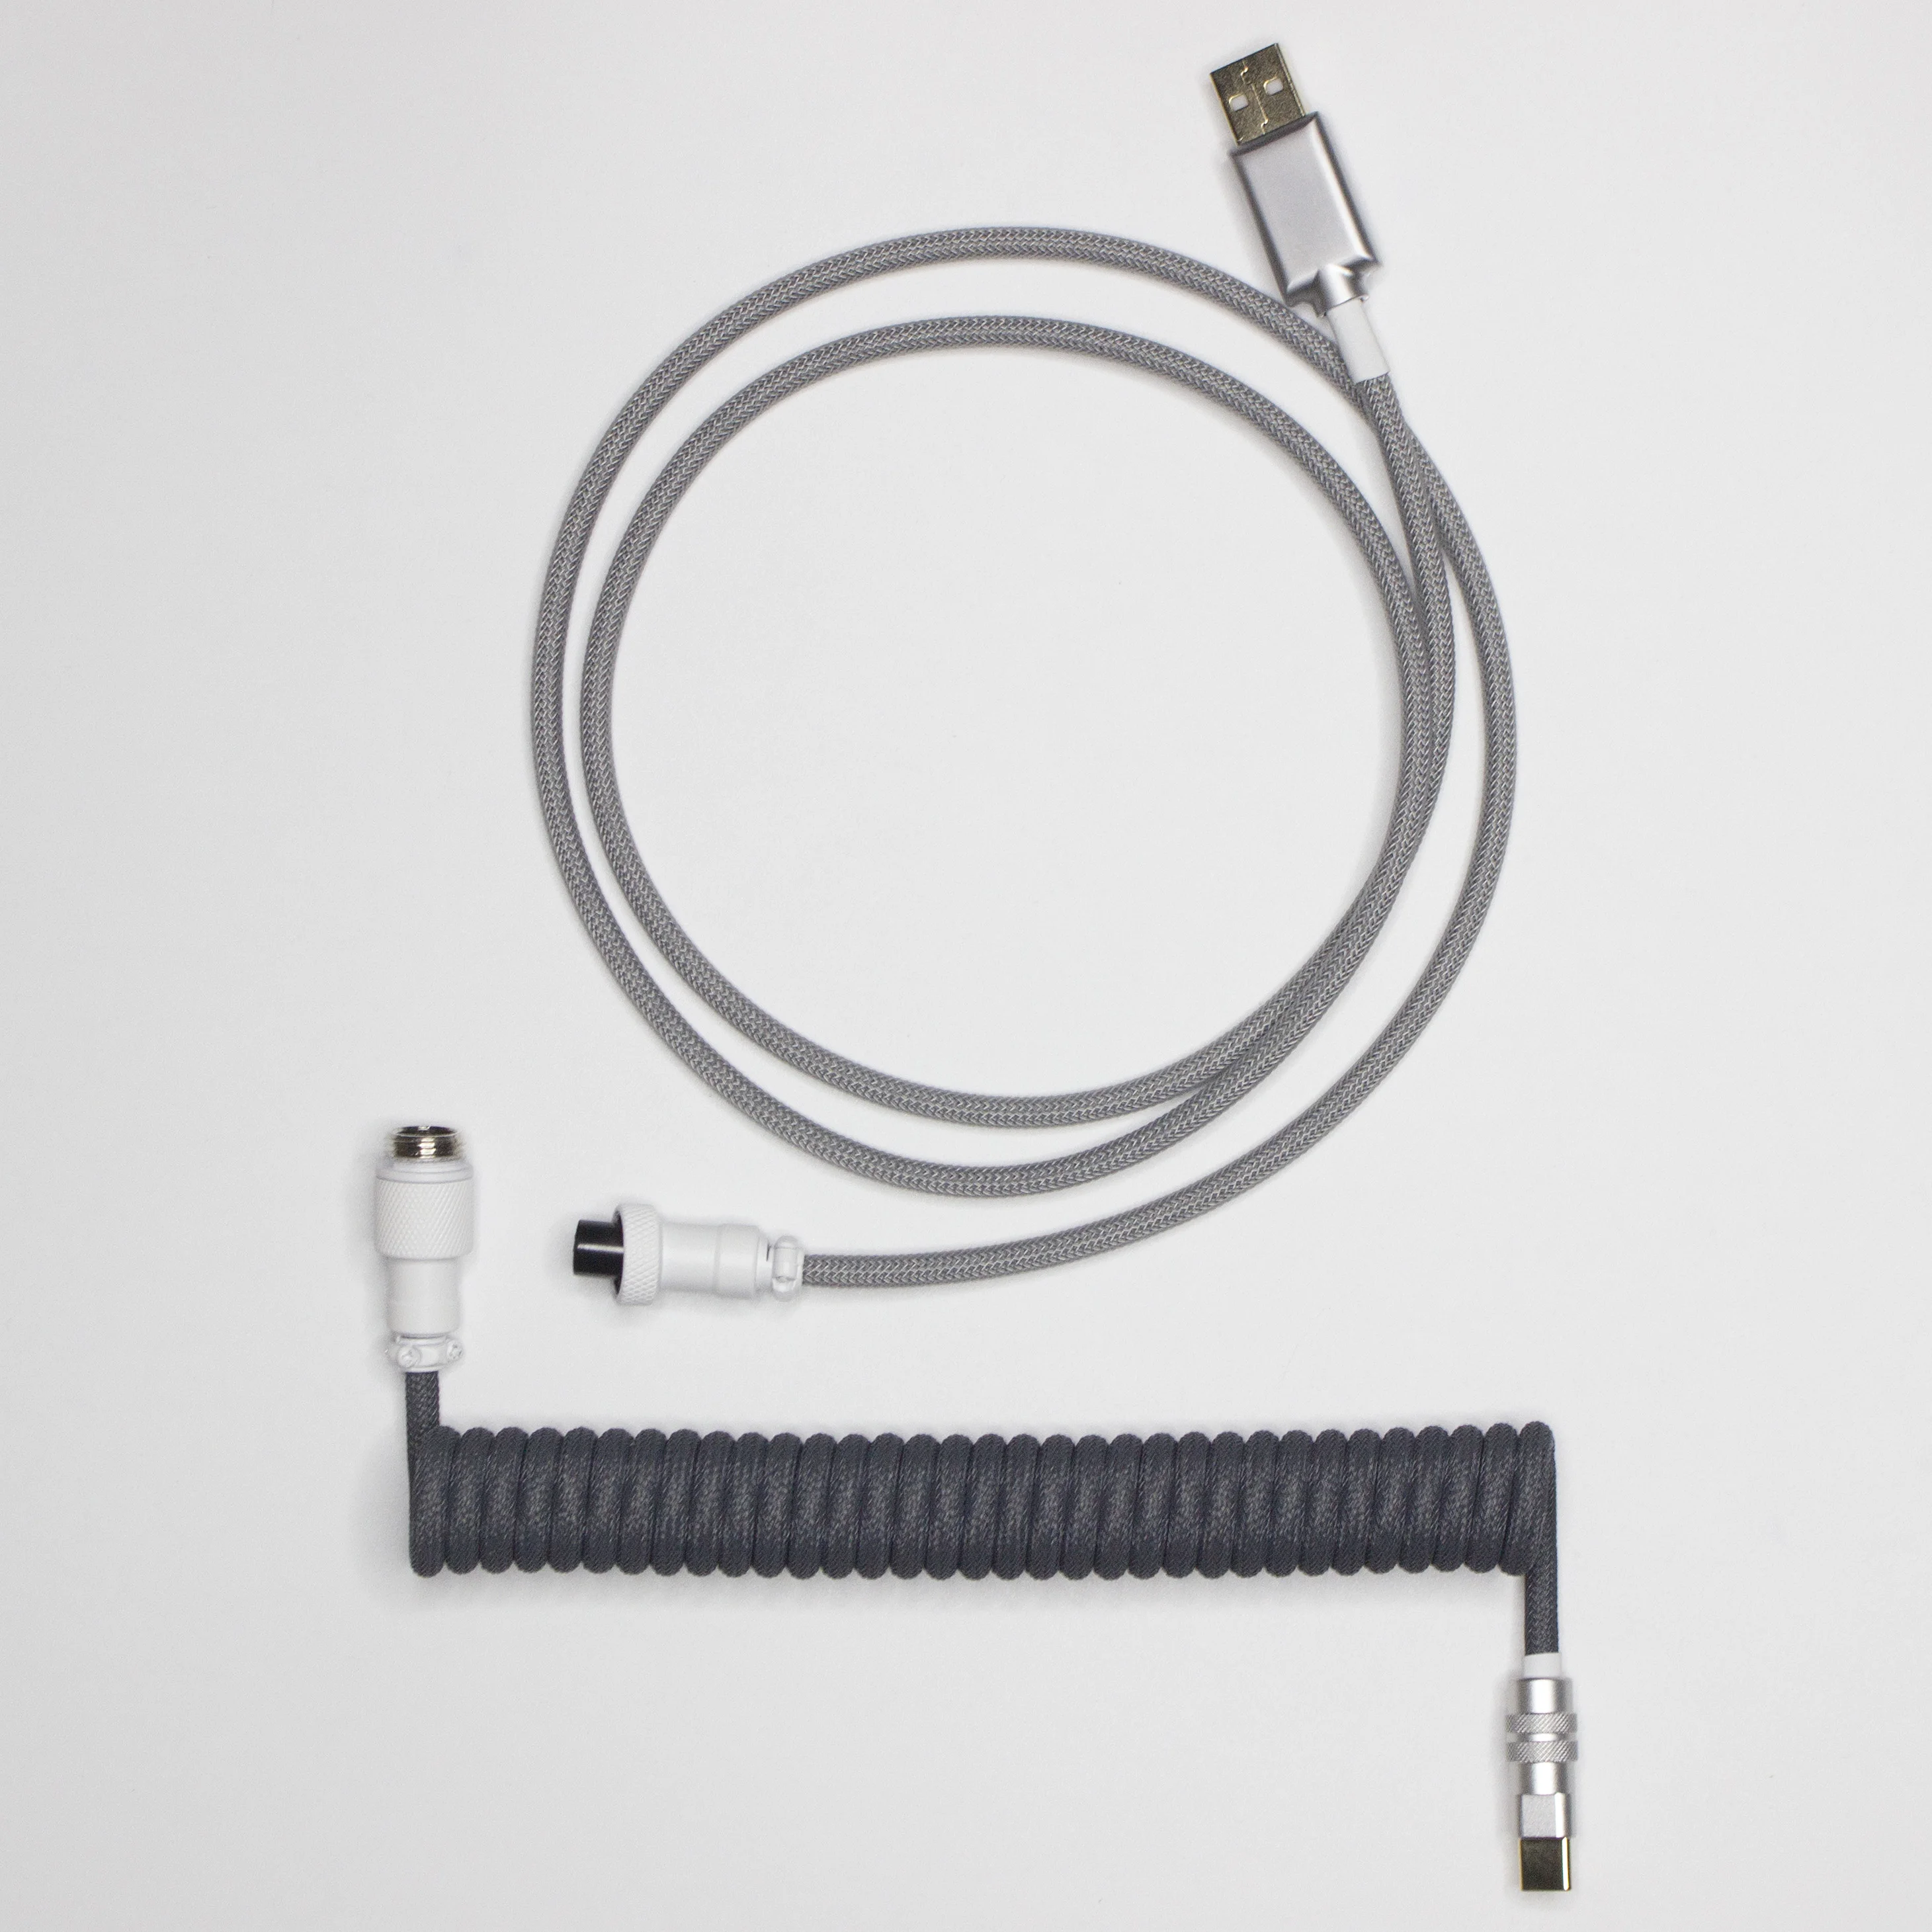 Fancy Customized Keyboard Cable Spiral Air Plug Braided Cable Two-section Type-c Suitable For Mechanical Keyboards